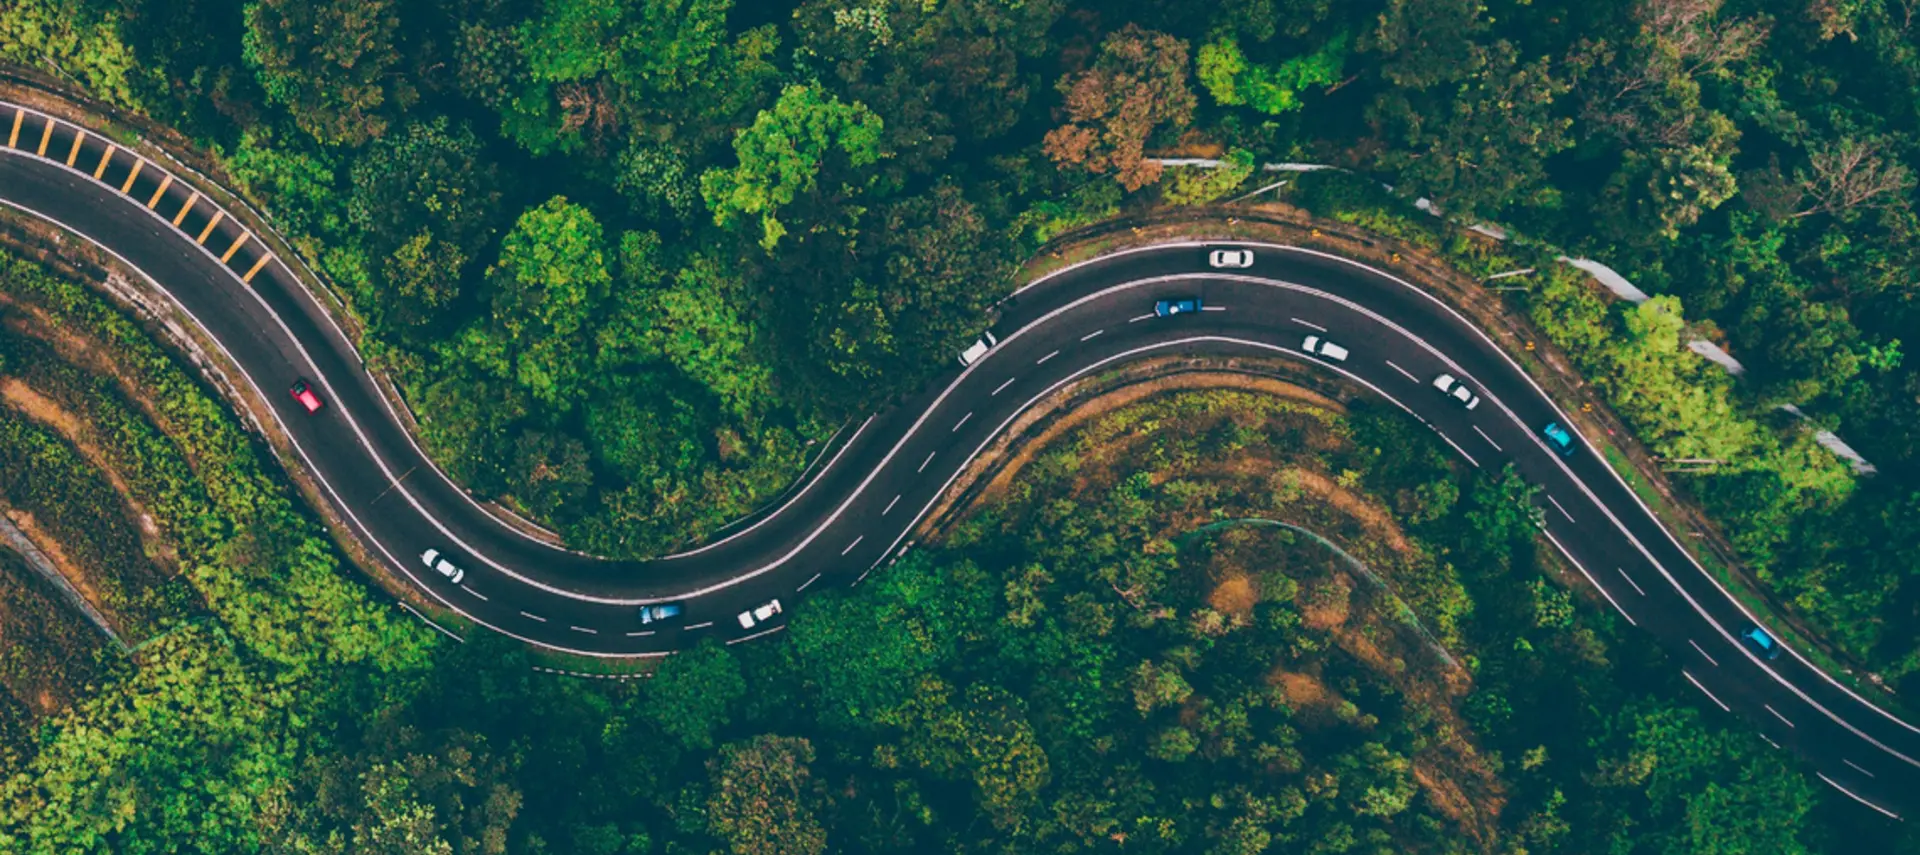 Aerial view of a road in the middle of a forest